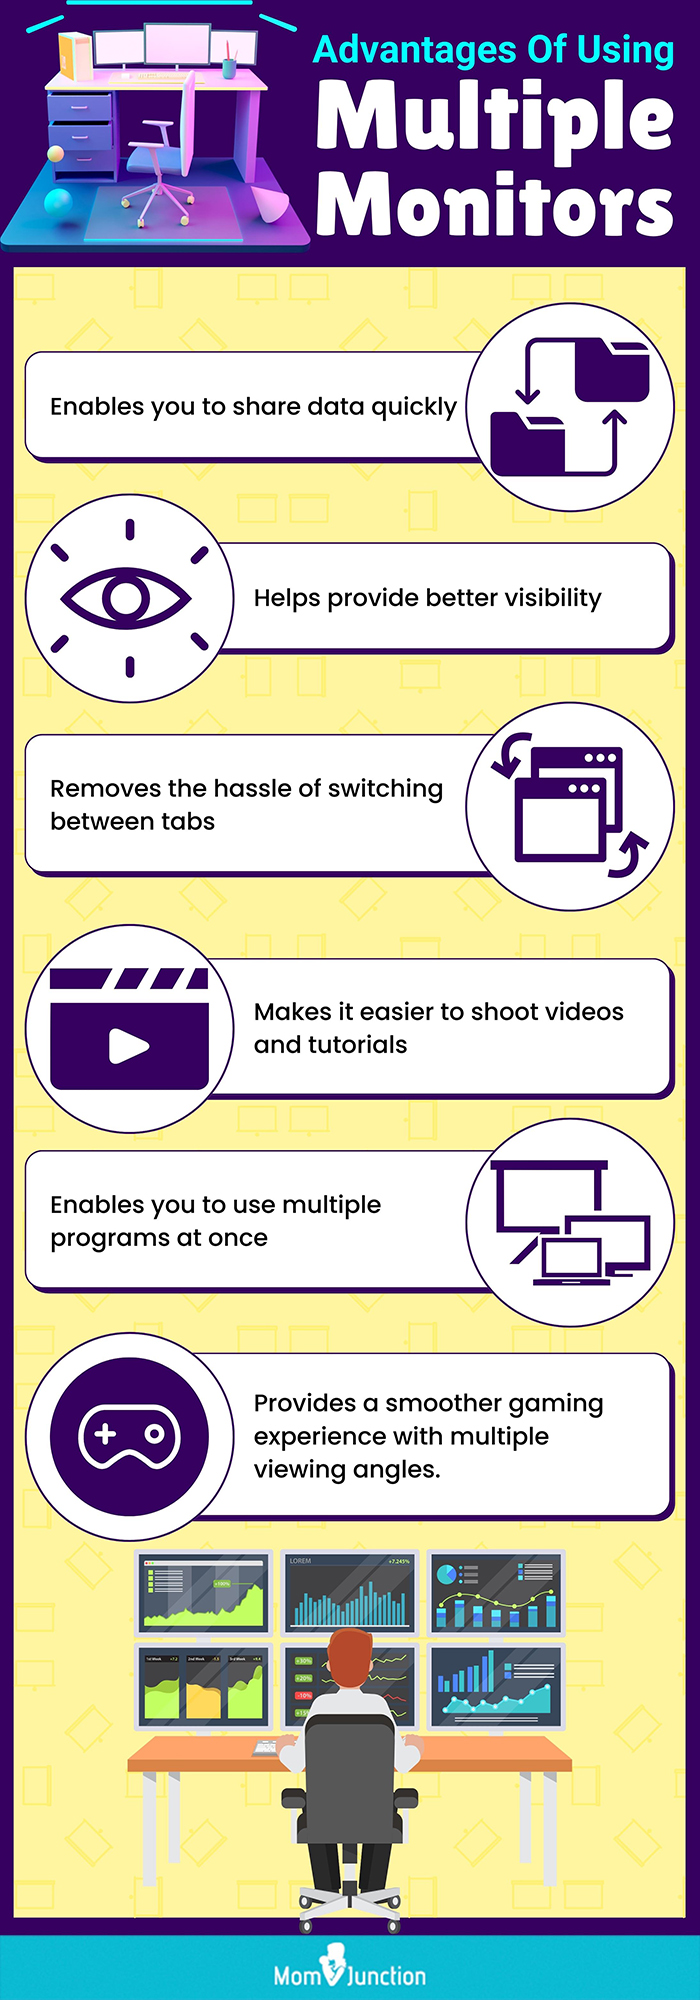 Advantages Of Using Multiple Monitors (Infographic)